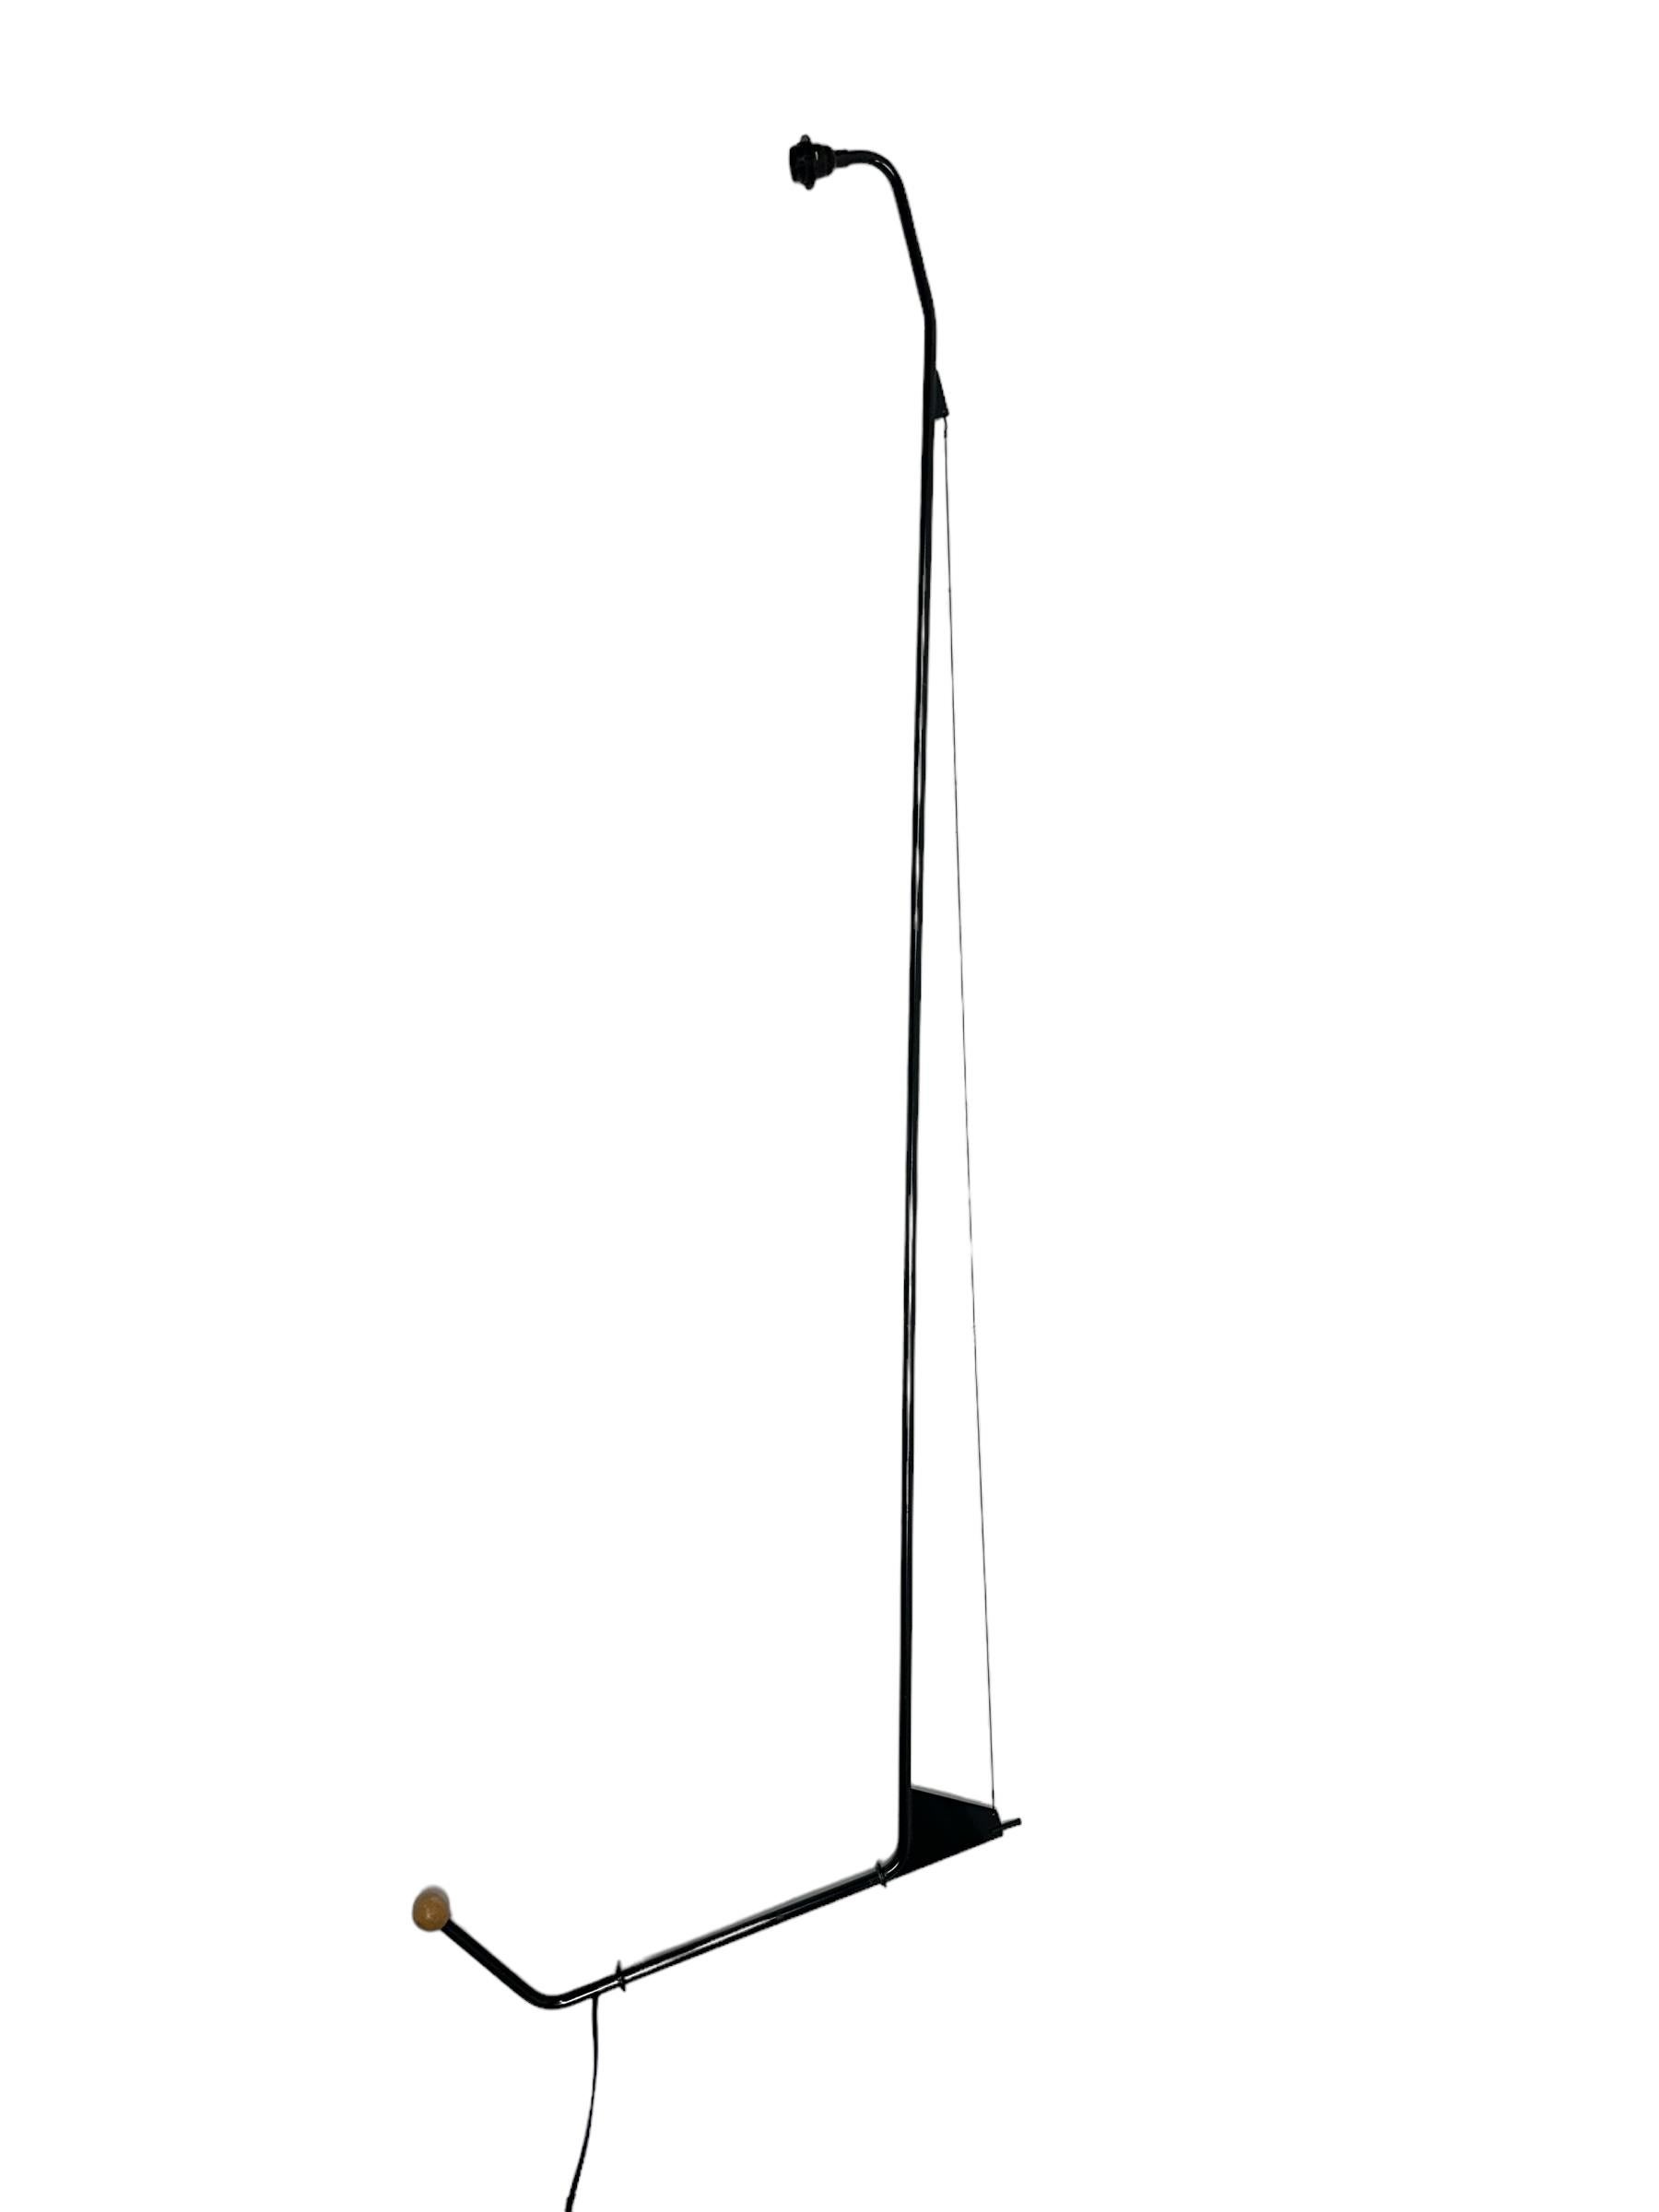 Designed by Jean Prouvé for his own groundbreaking La Maison Tropicale, the Potence Lamp (1950) provides a unique solution for suspension lighting with its ingenious engineering and elegant form. Consisting of a single metal rod that extends almost